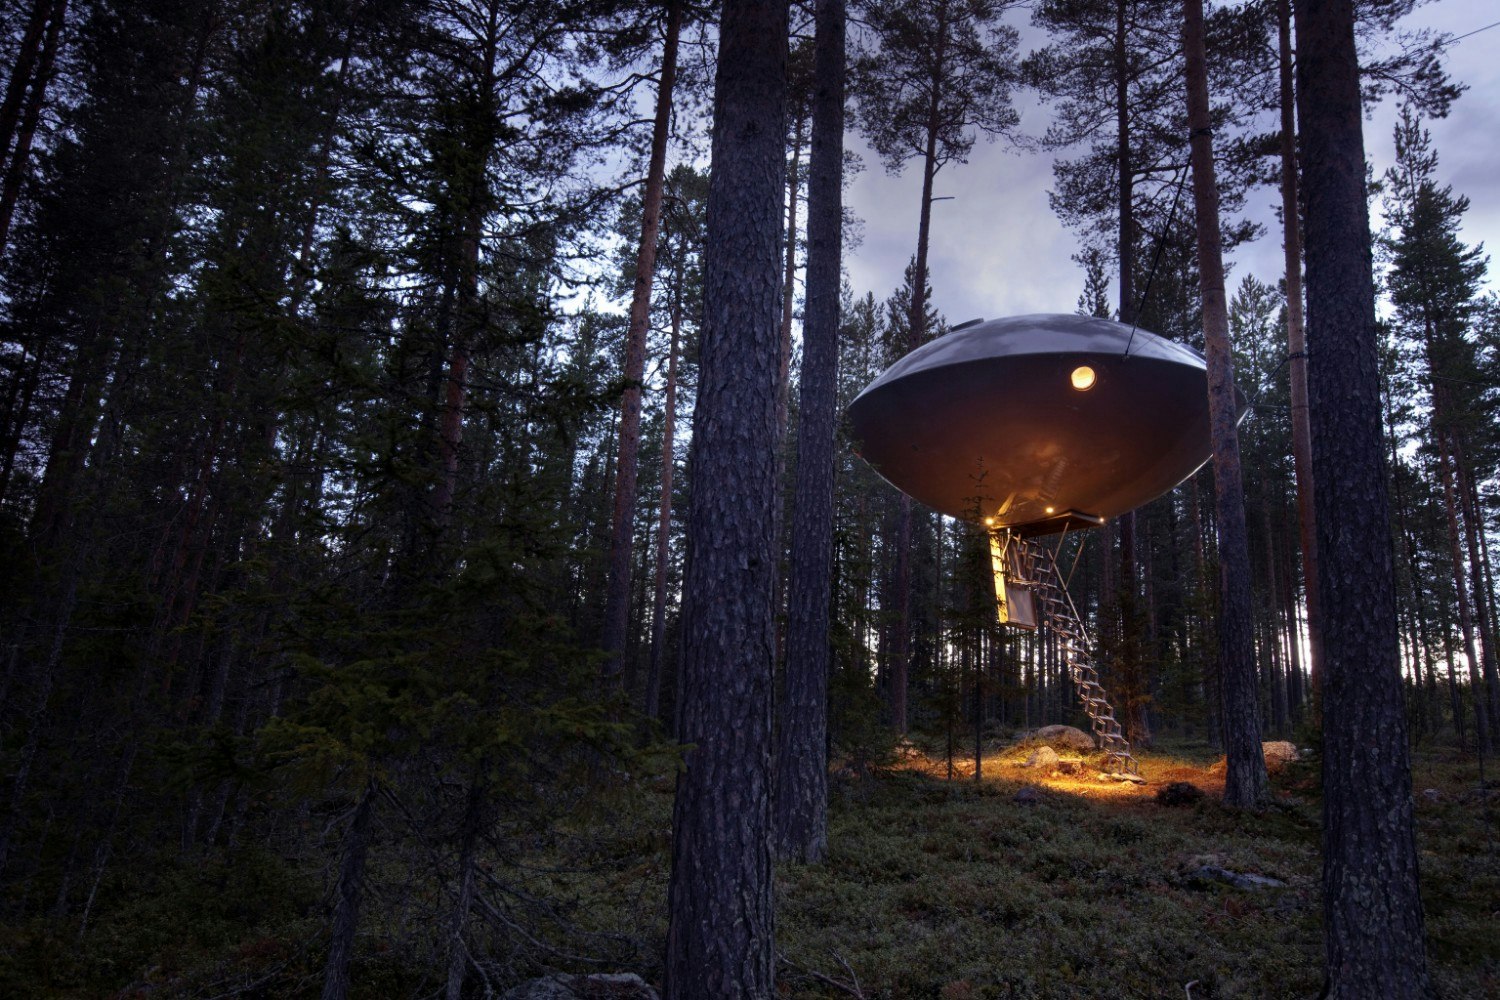 A metal, oval structure sits elevated between trees with a ladder going up to it.